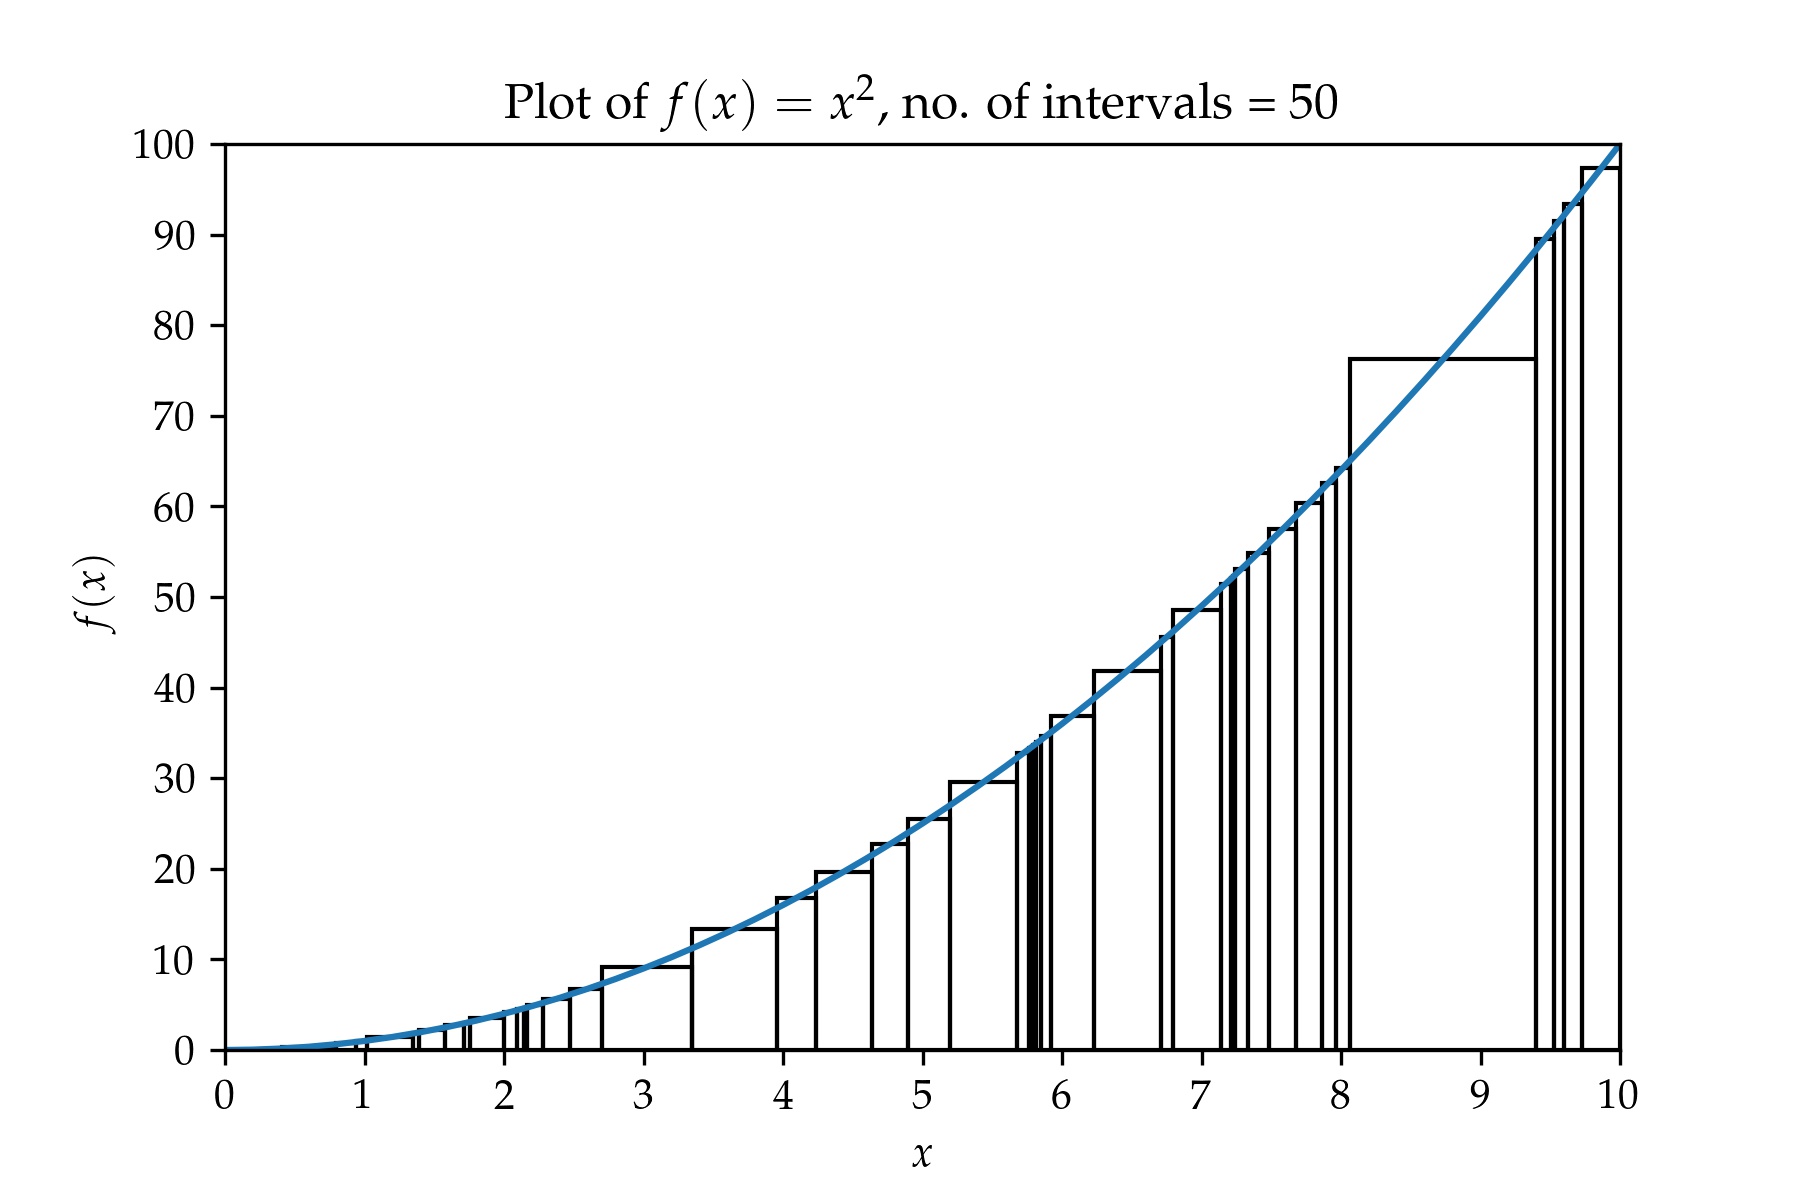 Plot of f(x) = x^2 with 50 samples